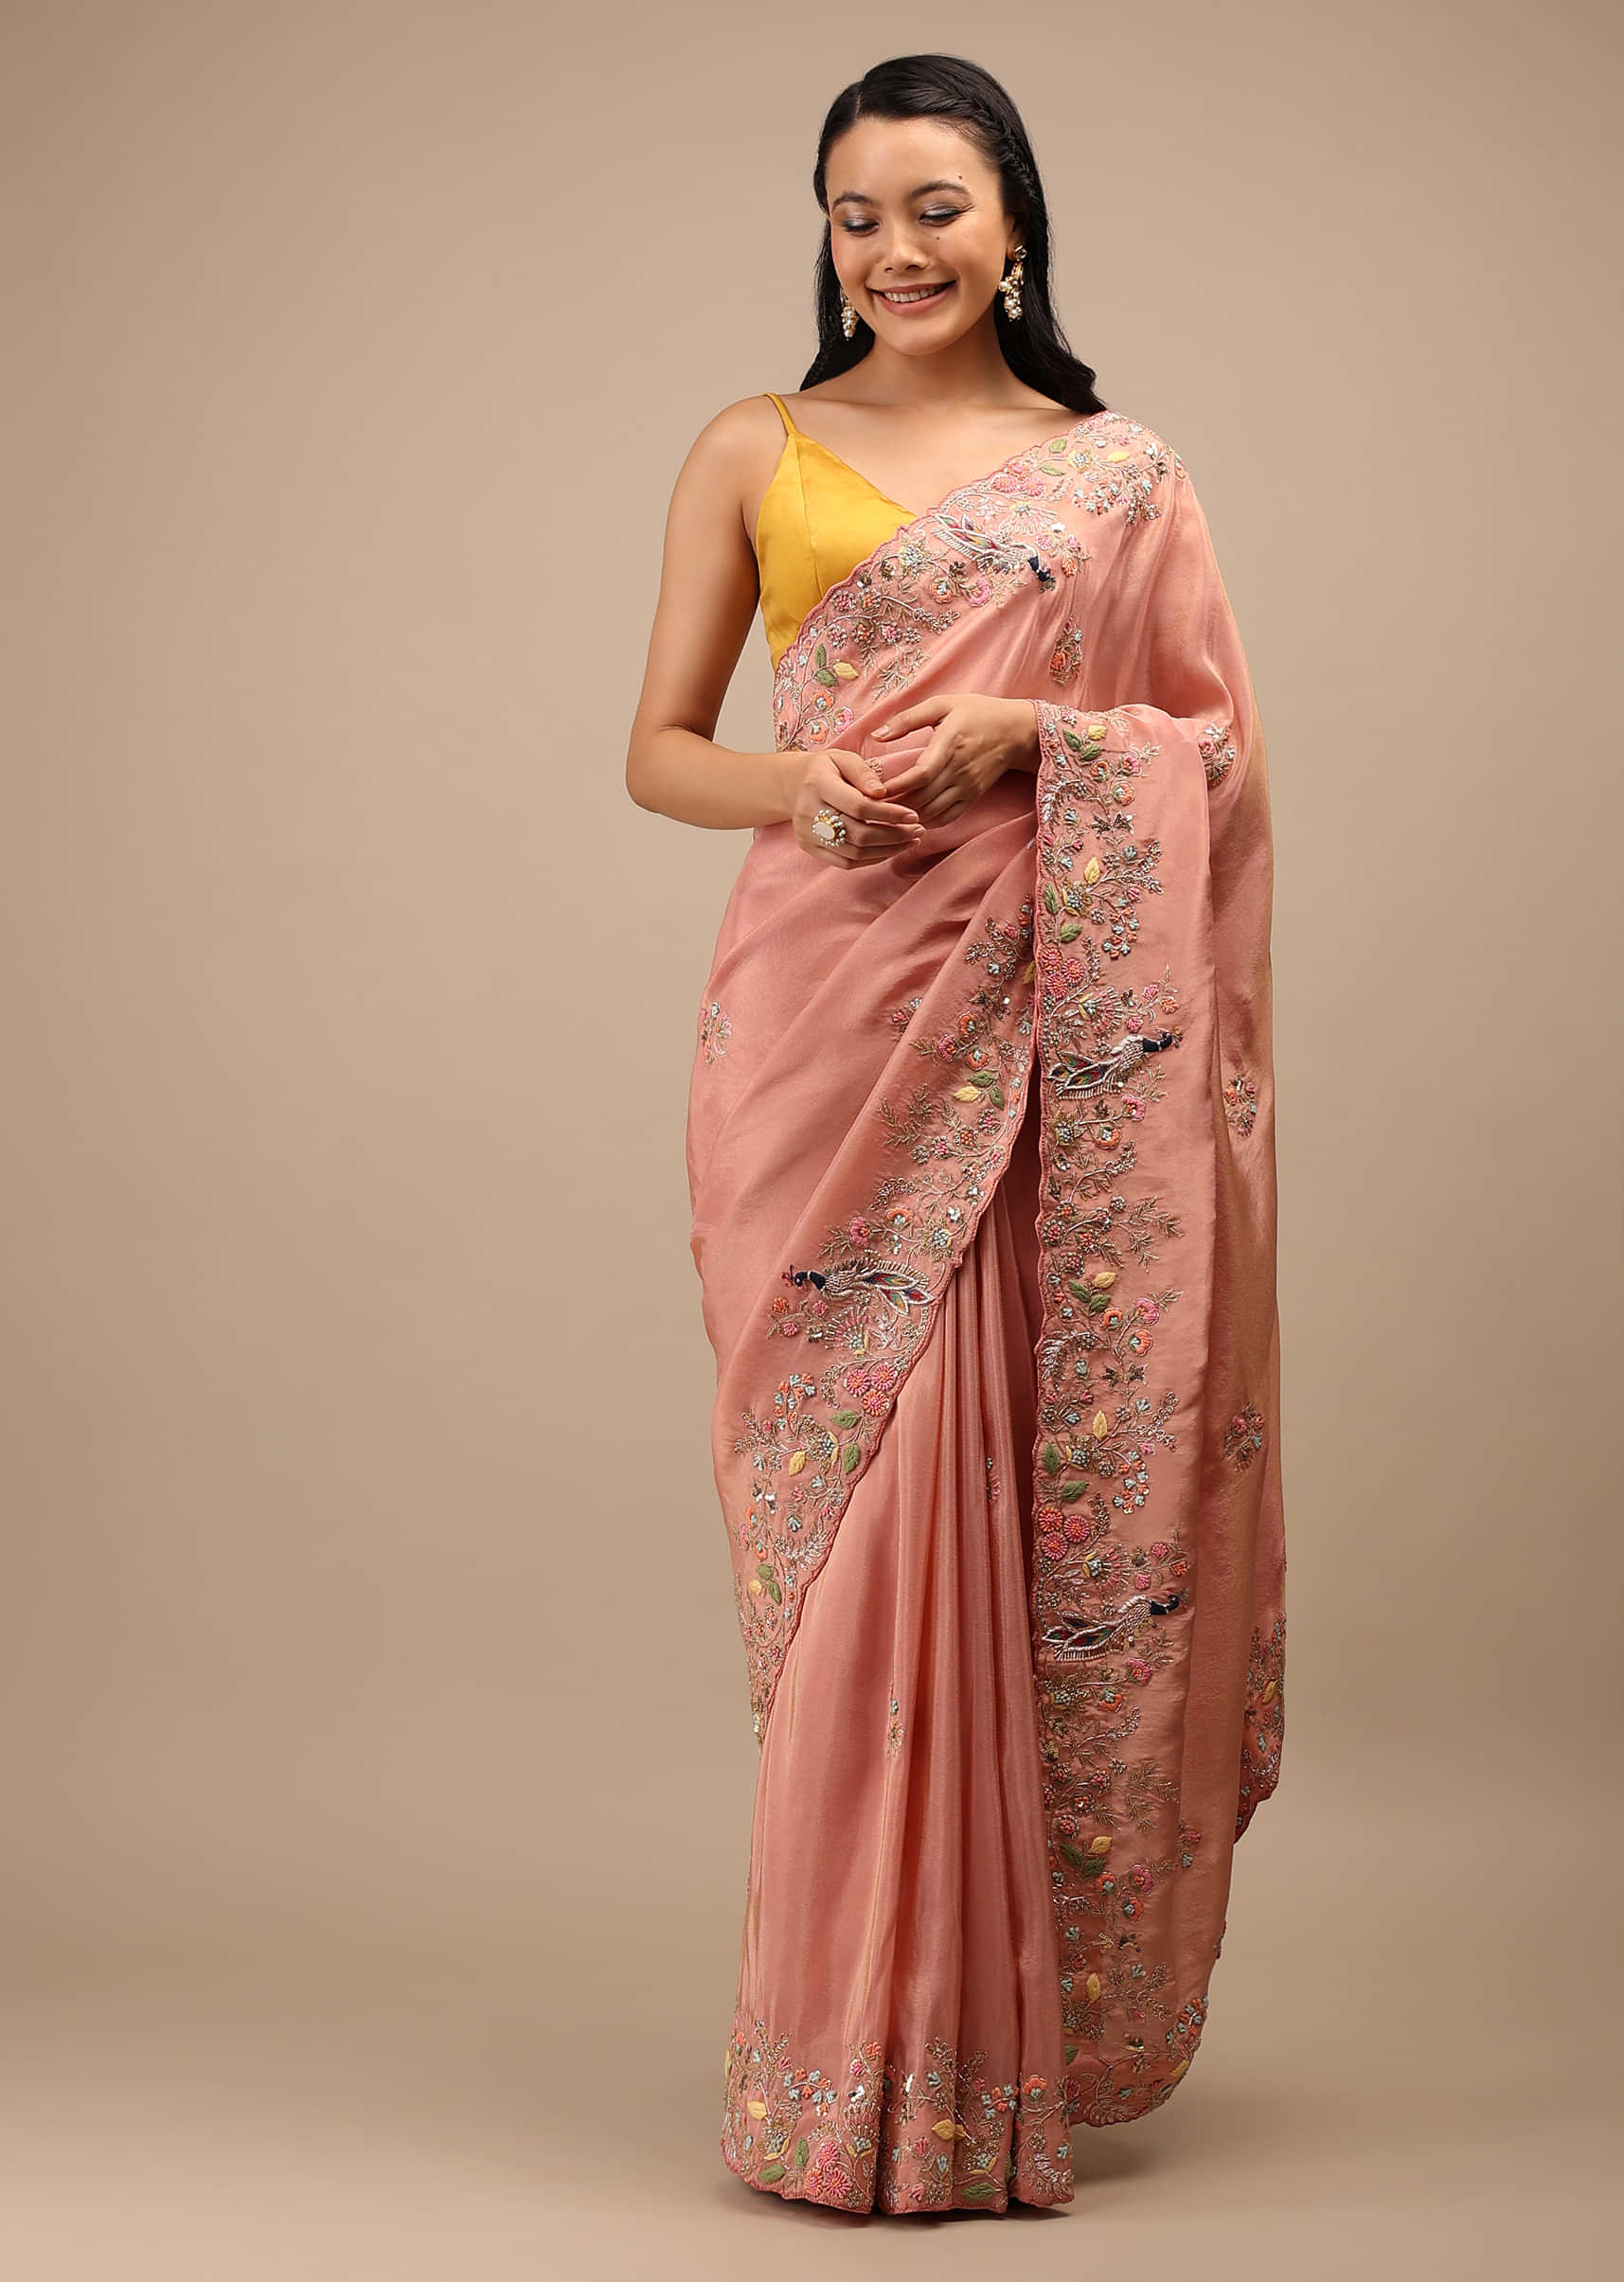 Peach Organza Saree In Multi-Color Resham And Peacock Motifs Work On The Border